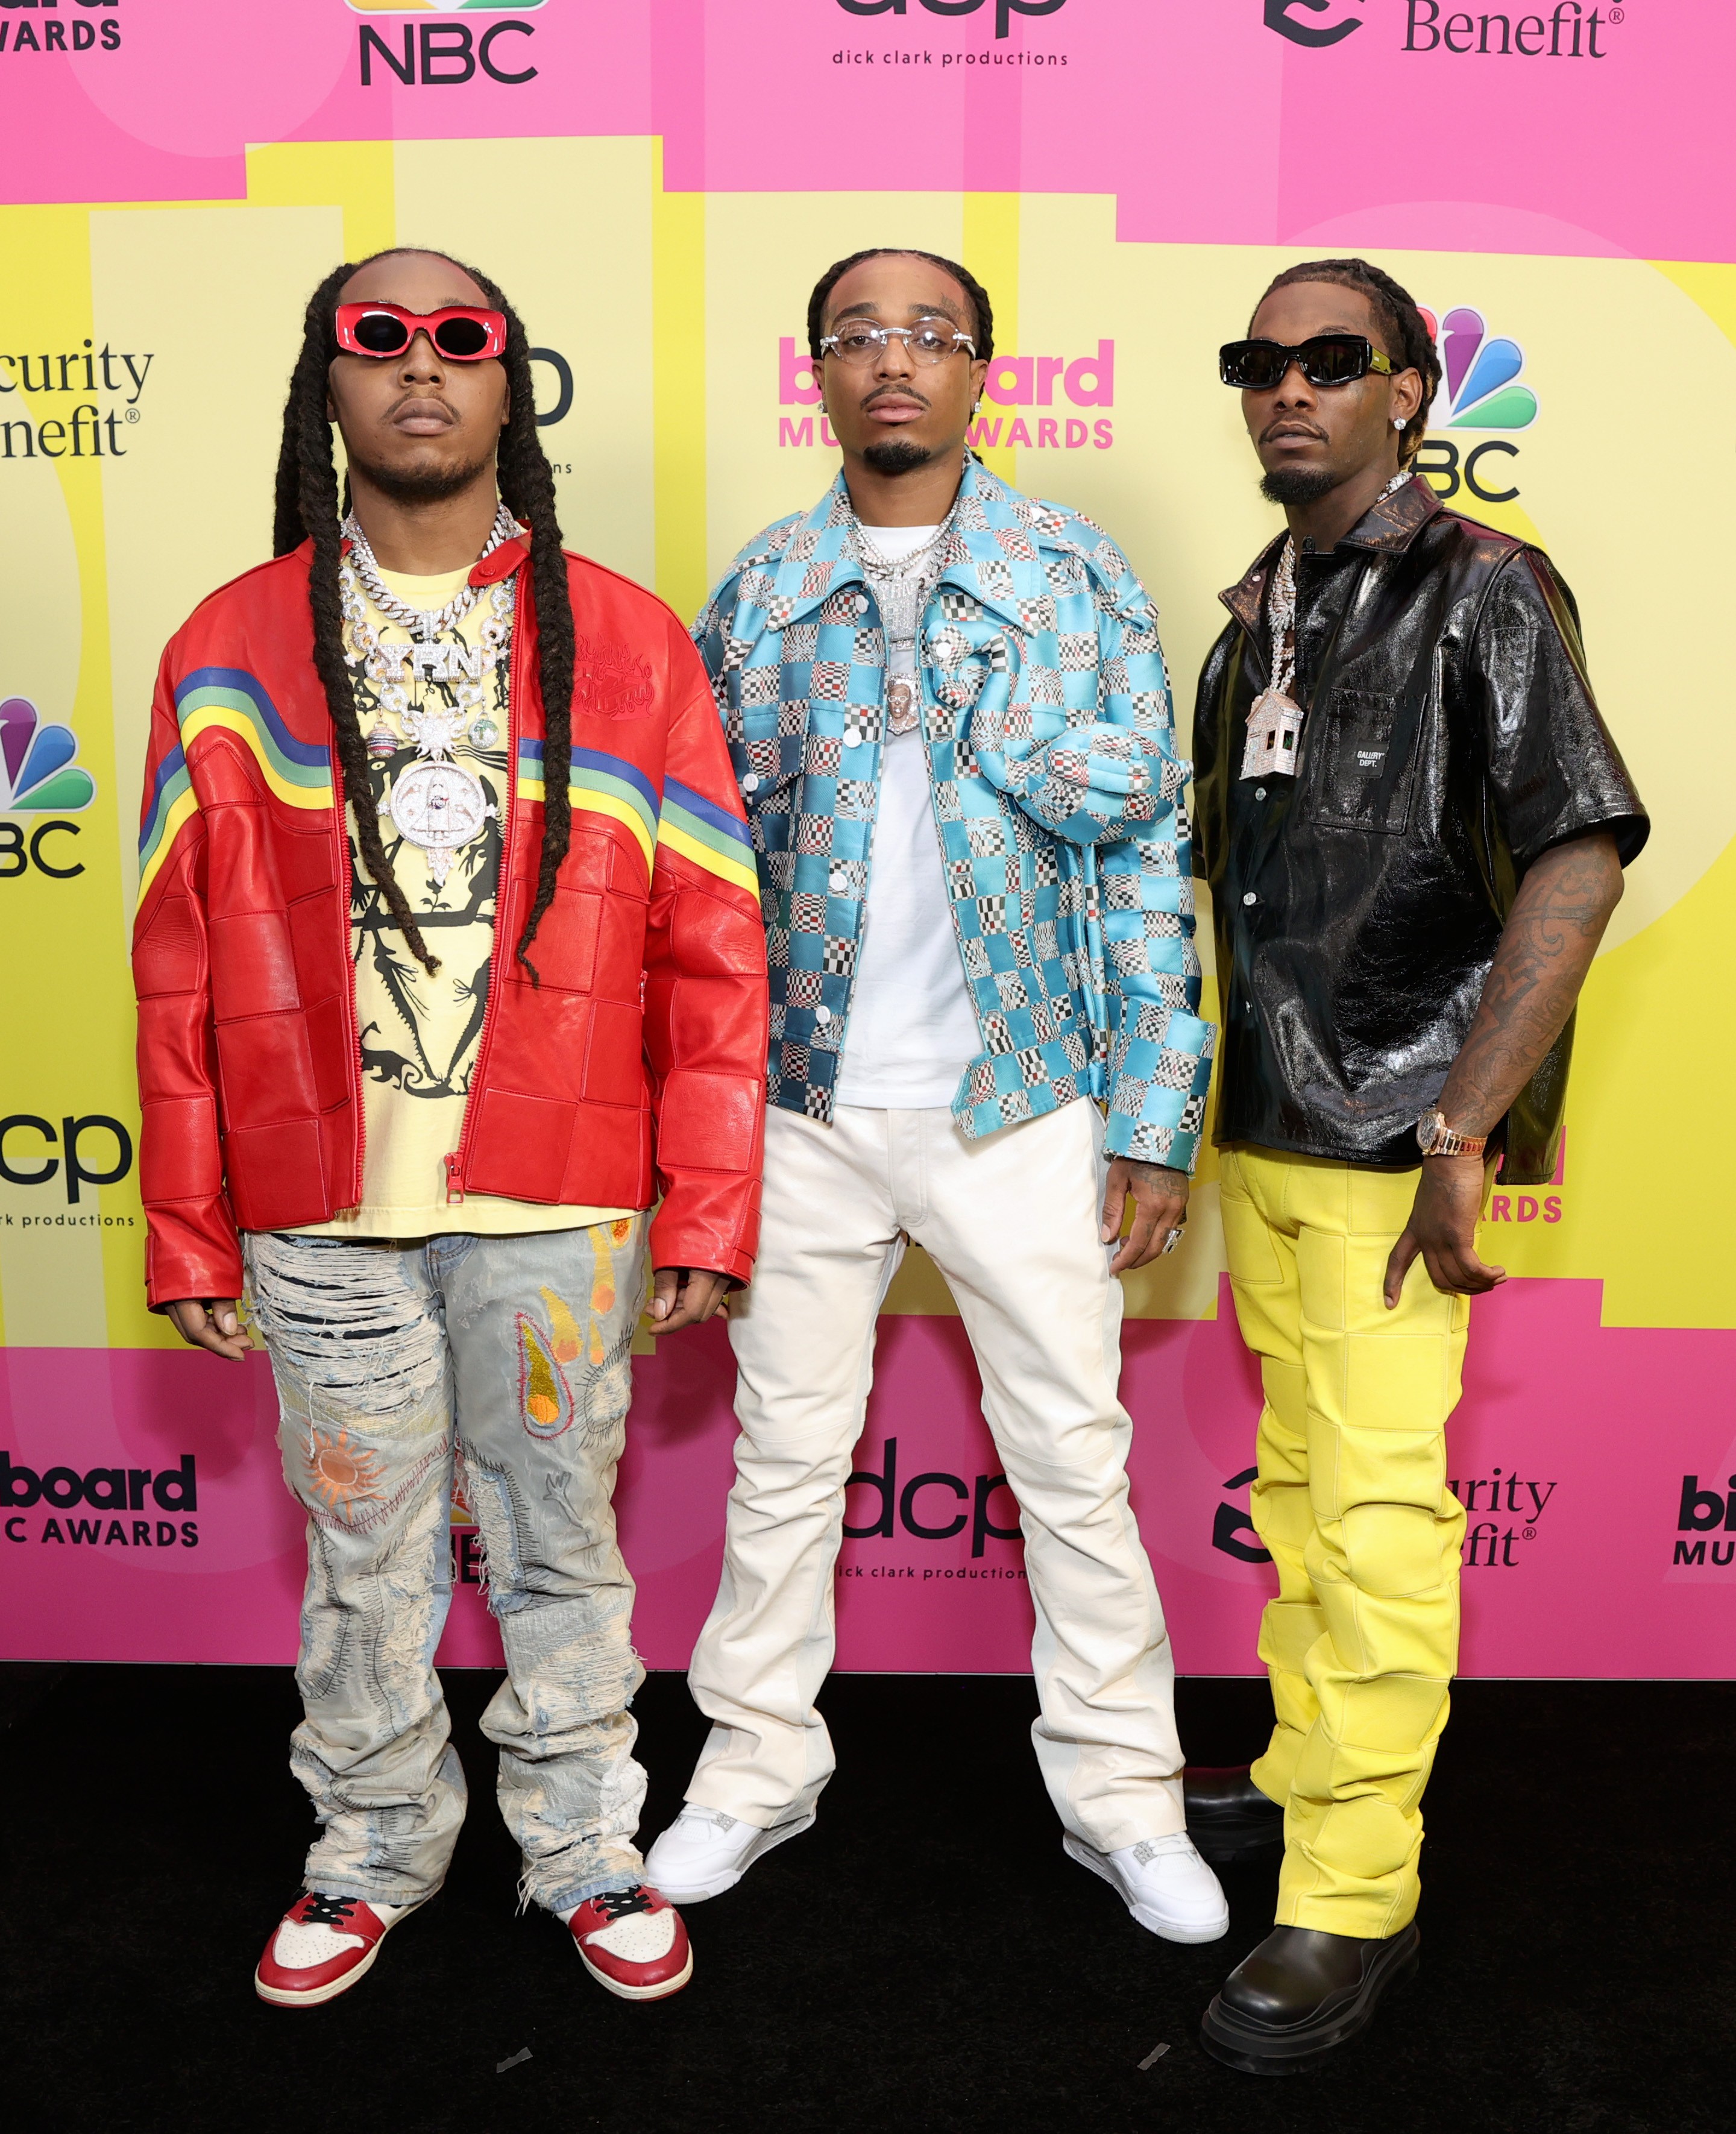 LOS ANGELES, CALIFORNIA - MAY 23: (L-R) Takeoff, Quavo, and Offset of Migos pose backstage for the 2021 Billboard Music Awards, broadcast on May 23, 2021 at Microsoft Theater in Los Angeles, California. (Photo by Rich Fury/Getty Images for dcp) (Foto: Getty Images for dcp)